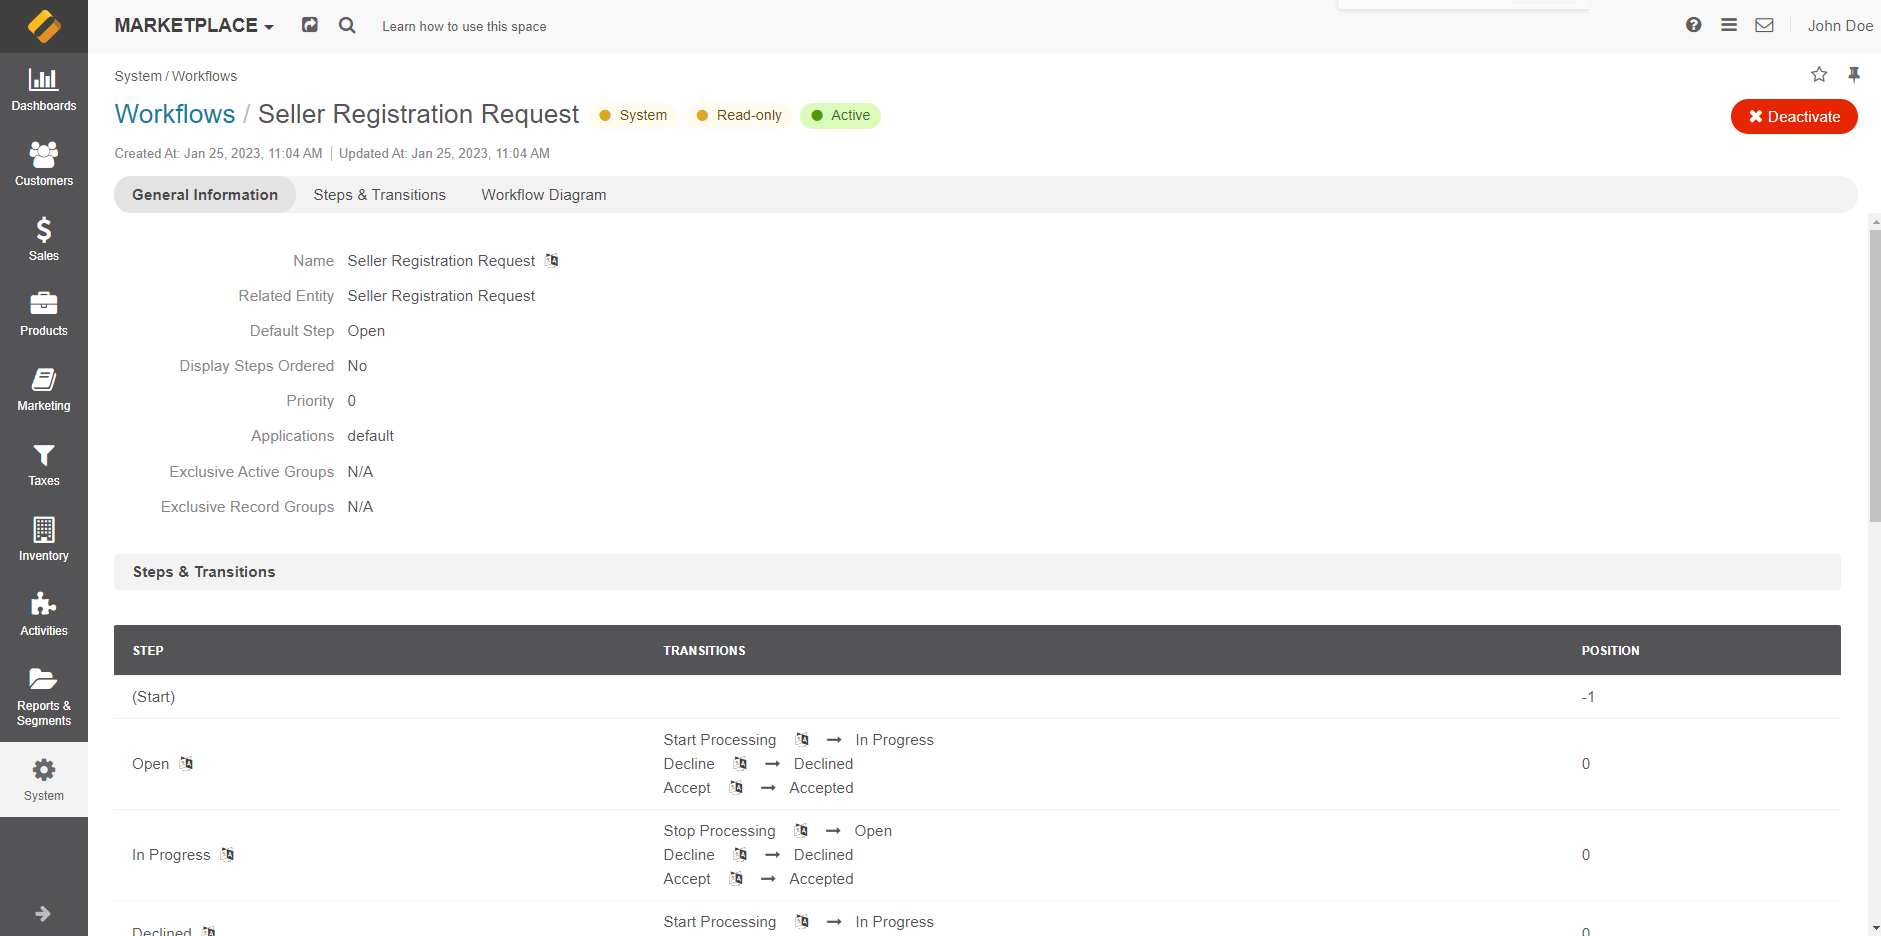 The view page of the seller registration request workflow